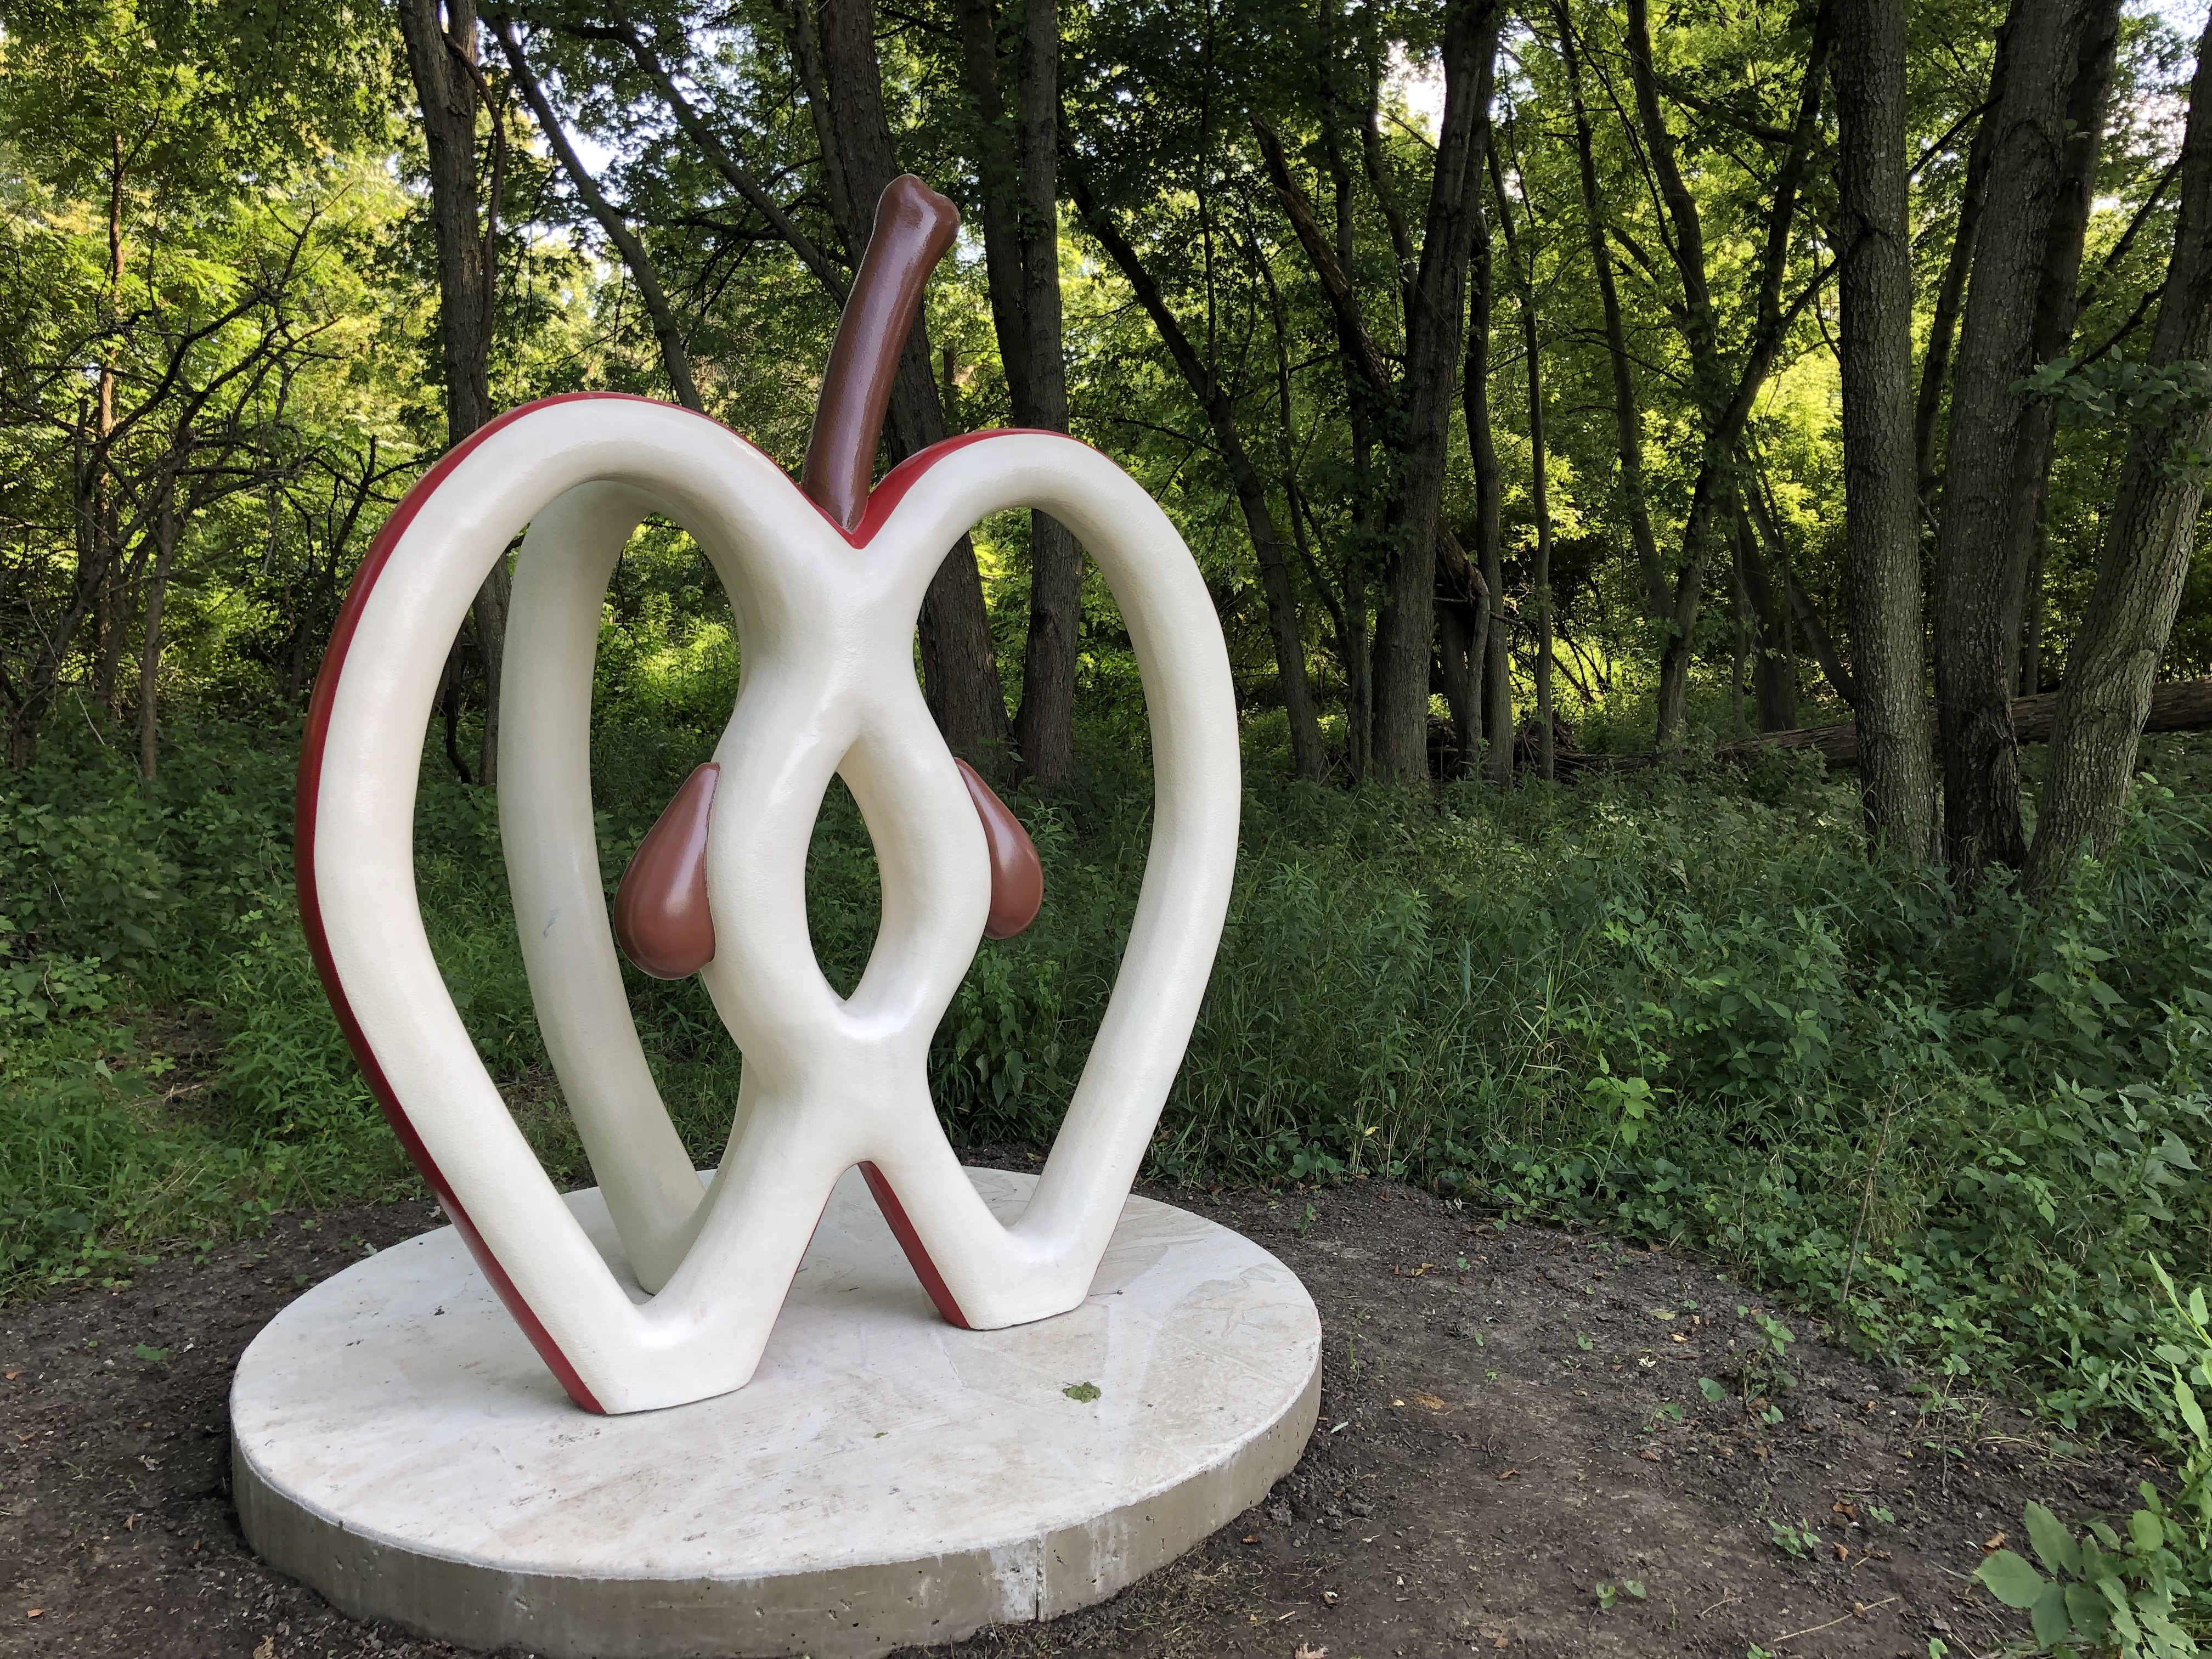 There’s a new sculpture at Meadowbrook Park